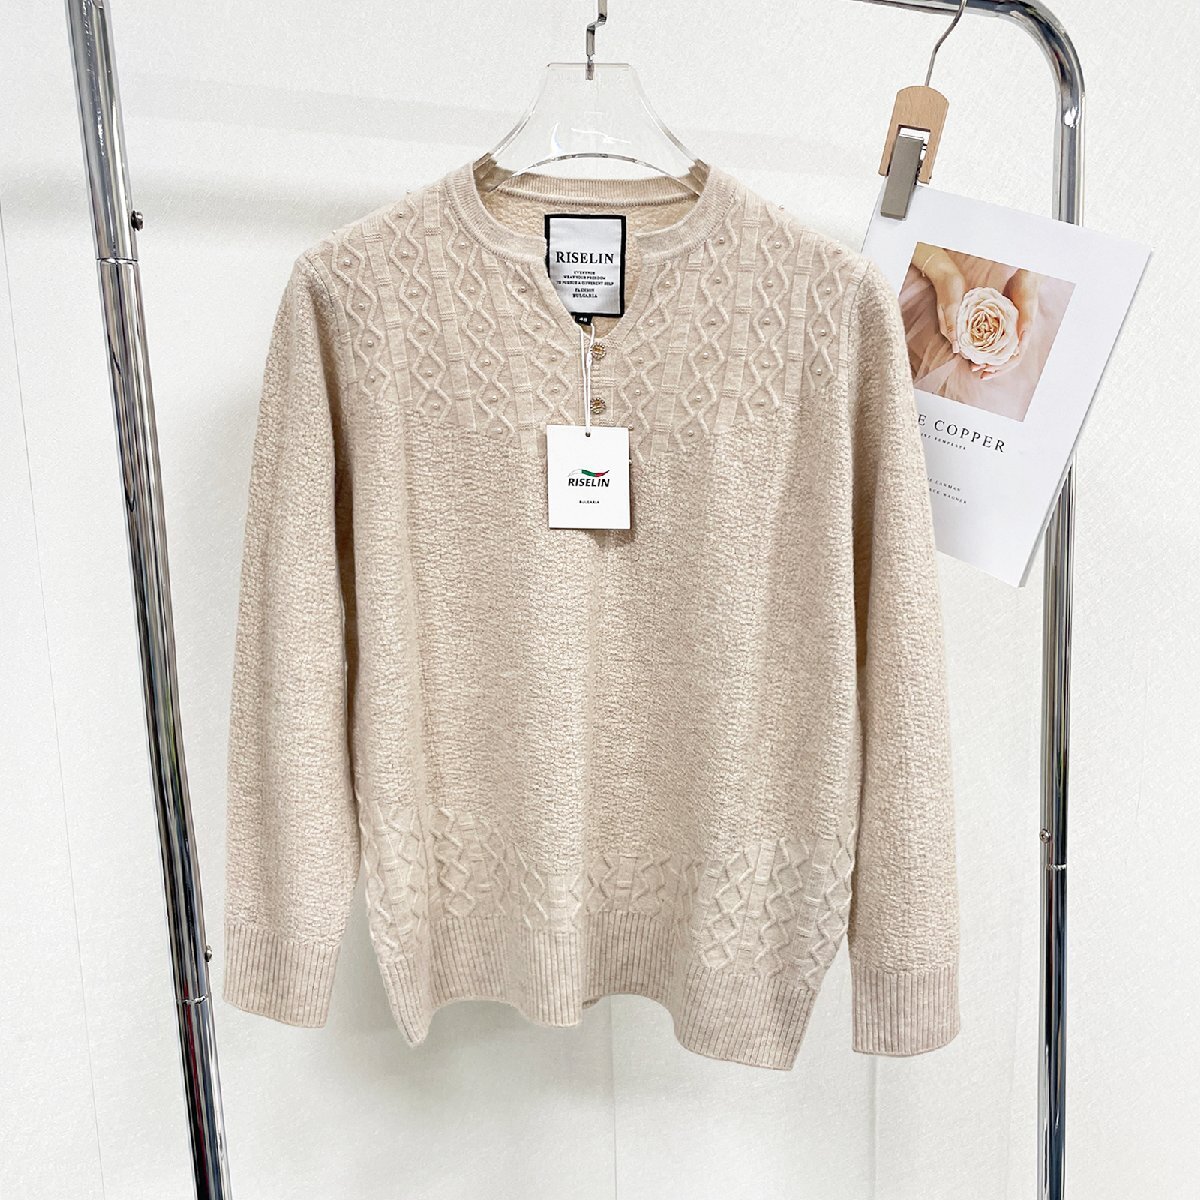  new work Europe made * regular price 5 ten thousand * BVLGARY a departure *RISELIN sweater on goods wool . protection against cold soft comfortable knitted tops beautiful lady's 2XL/52